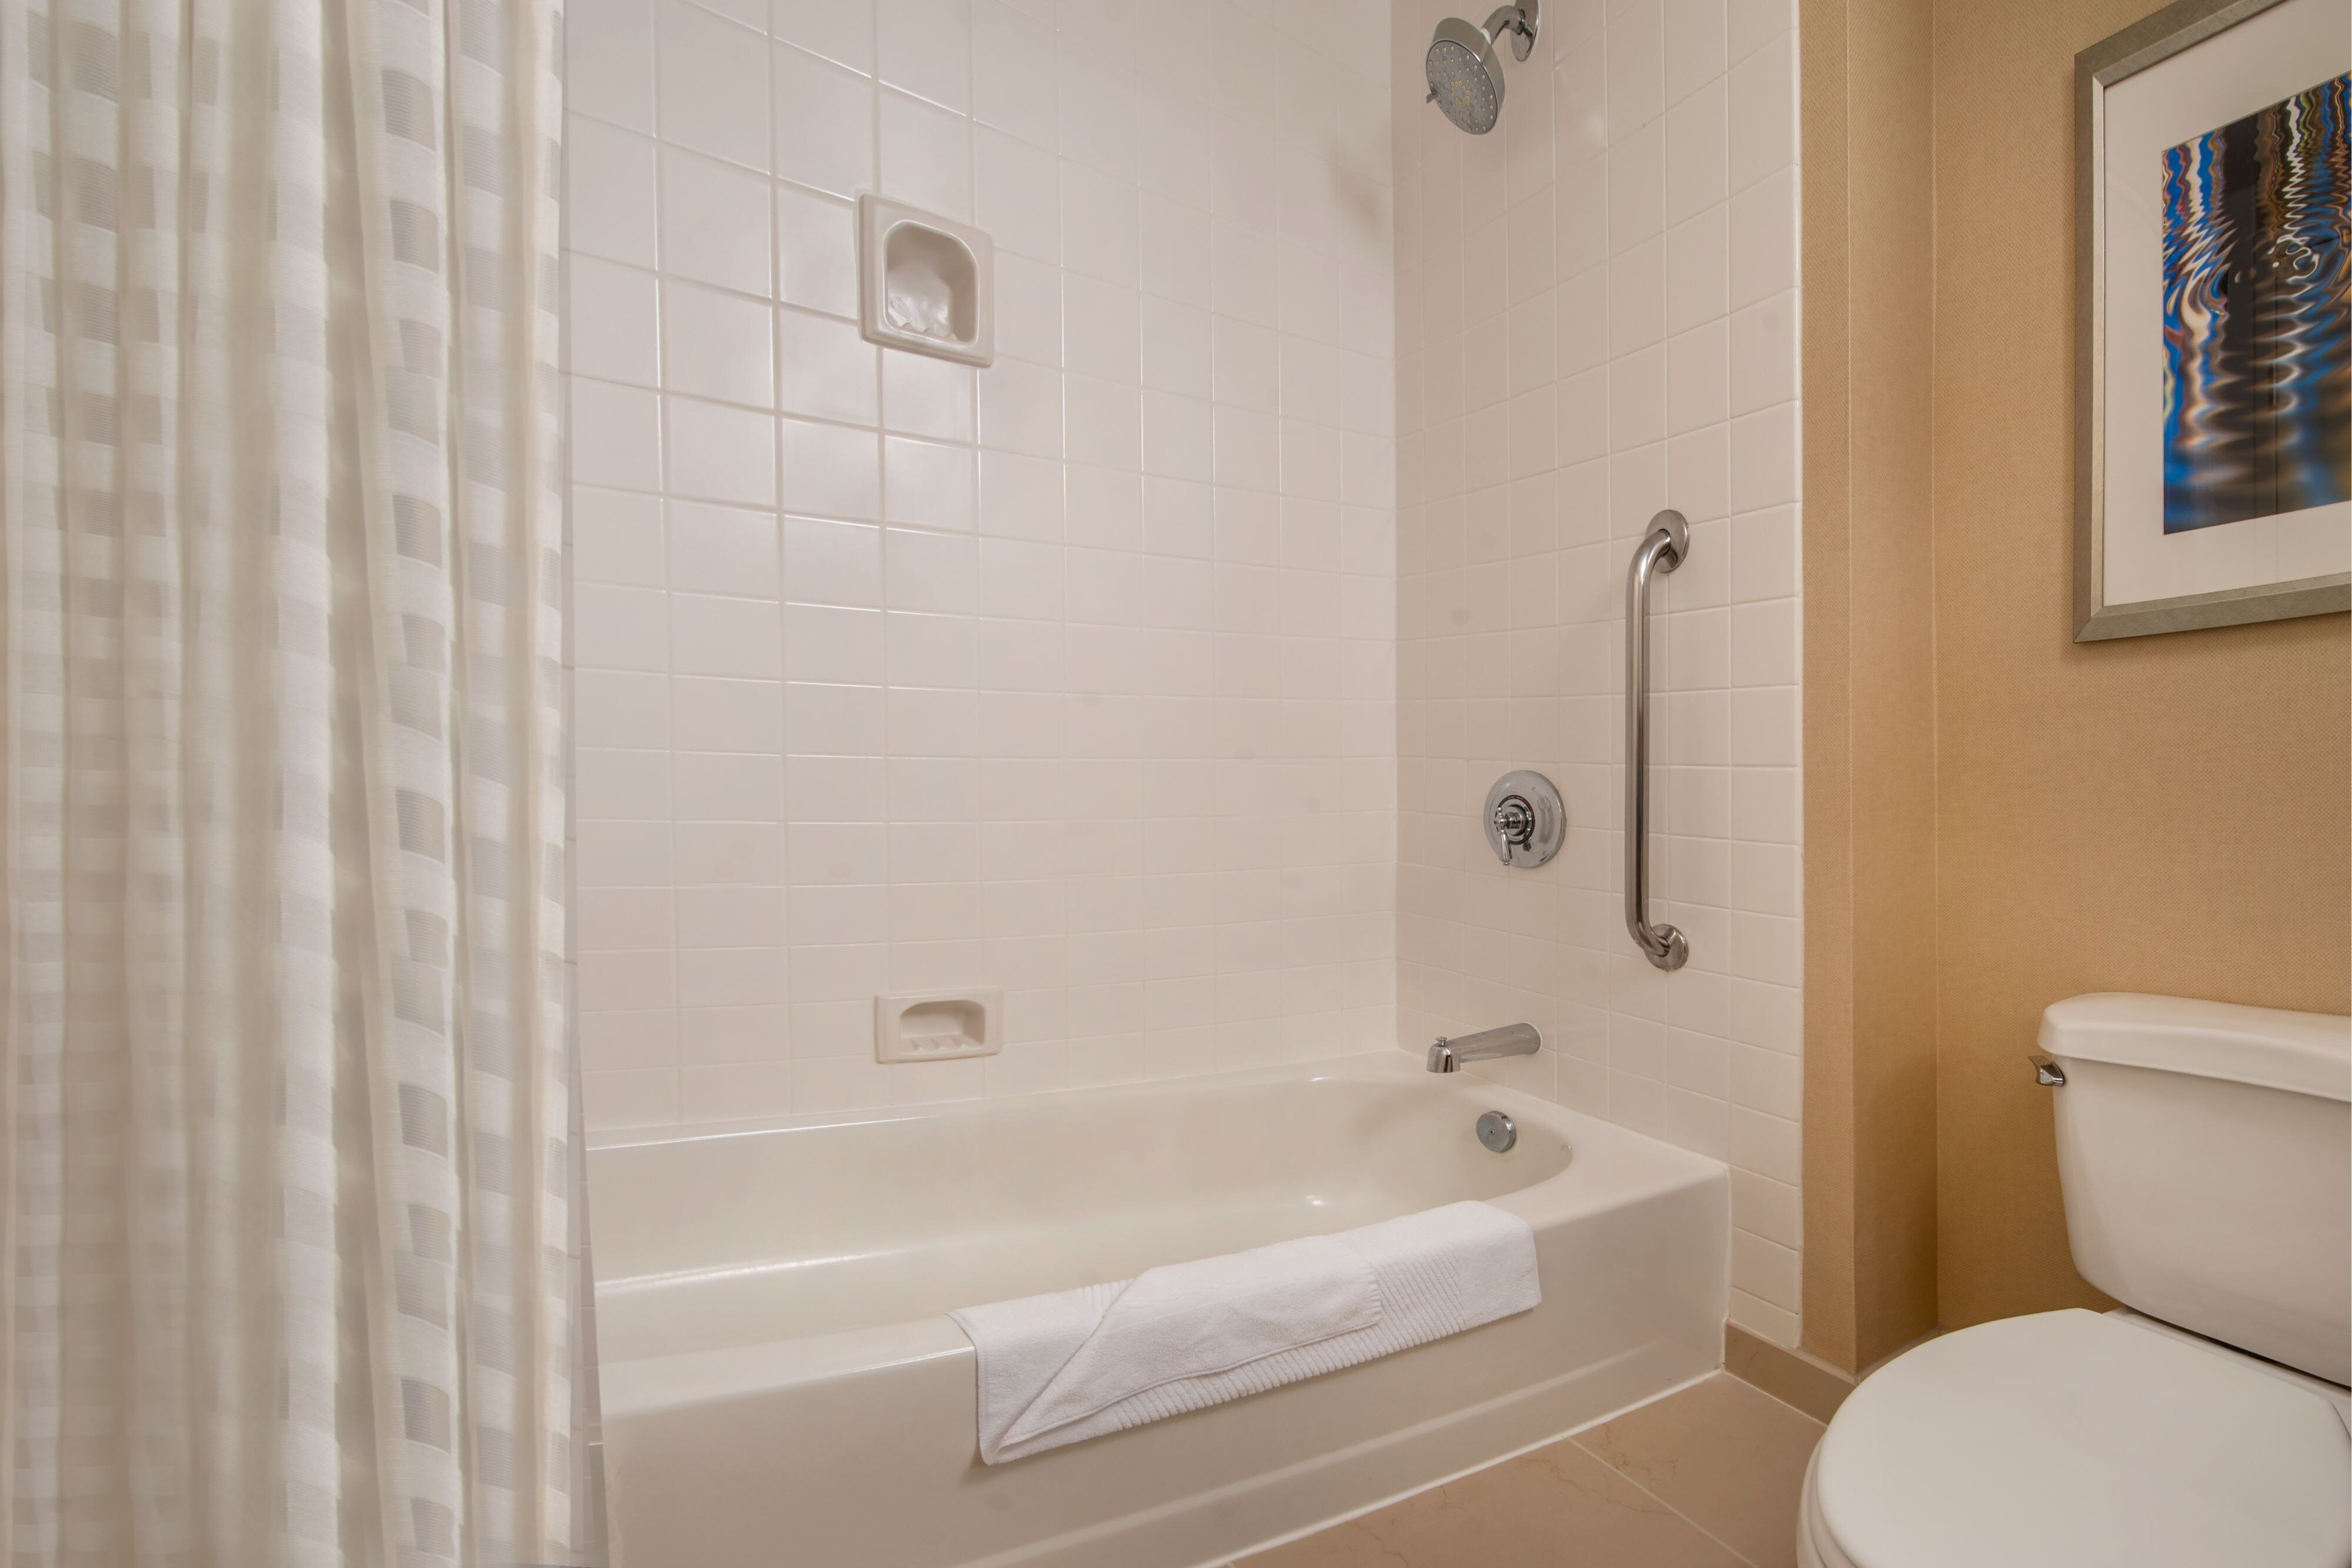 Accessible Guest Bathroom - Shower and Bathtub